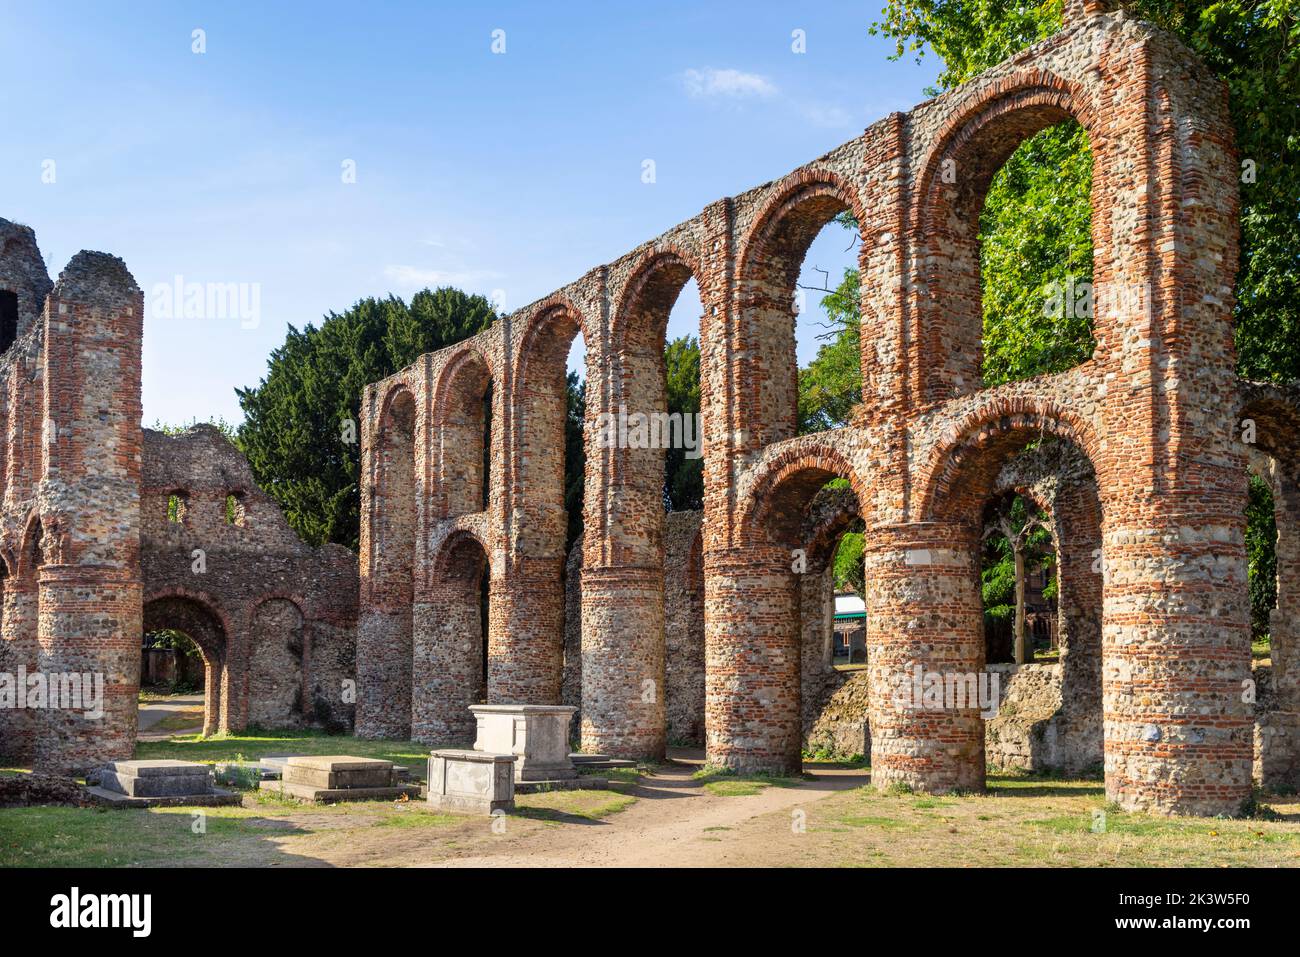 Ruins of St. Botolph's Priory a medieval house of Augustinian canons Colchester Essex England UK GB Europe Stock Photo